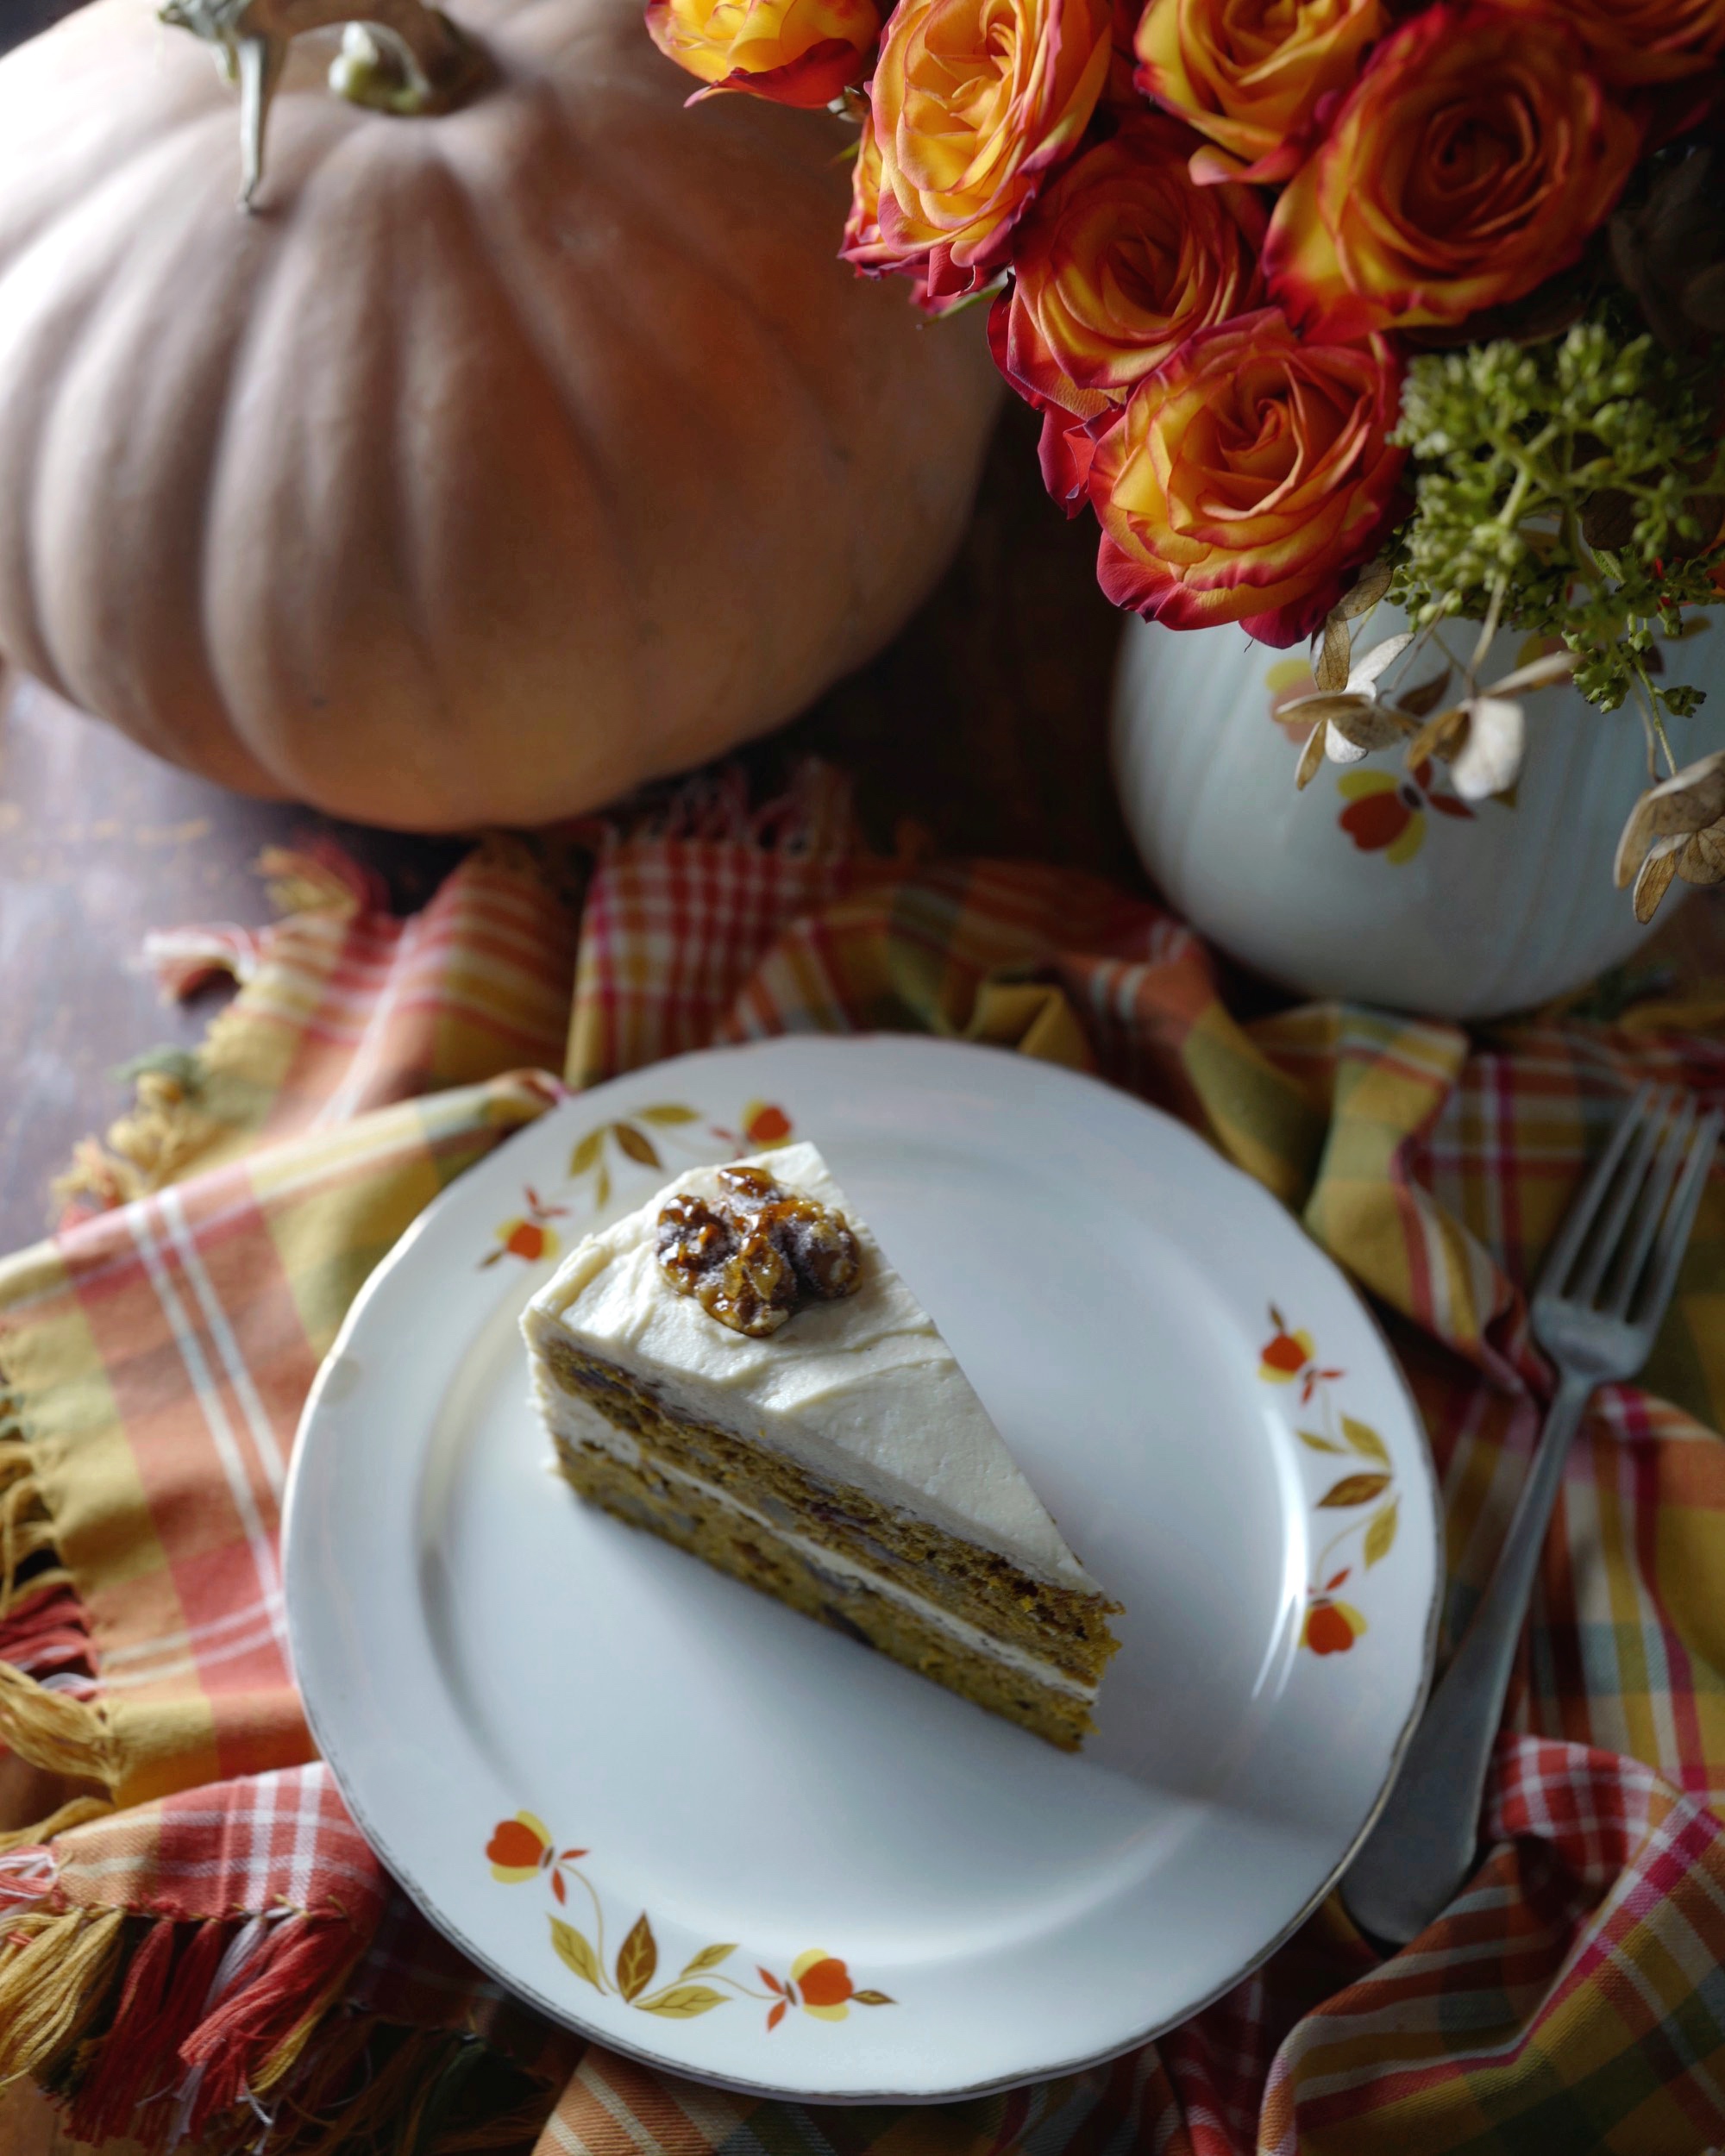 Putting dates, walnuts and caramel with pumpkin welcomes fall into our
home